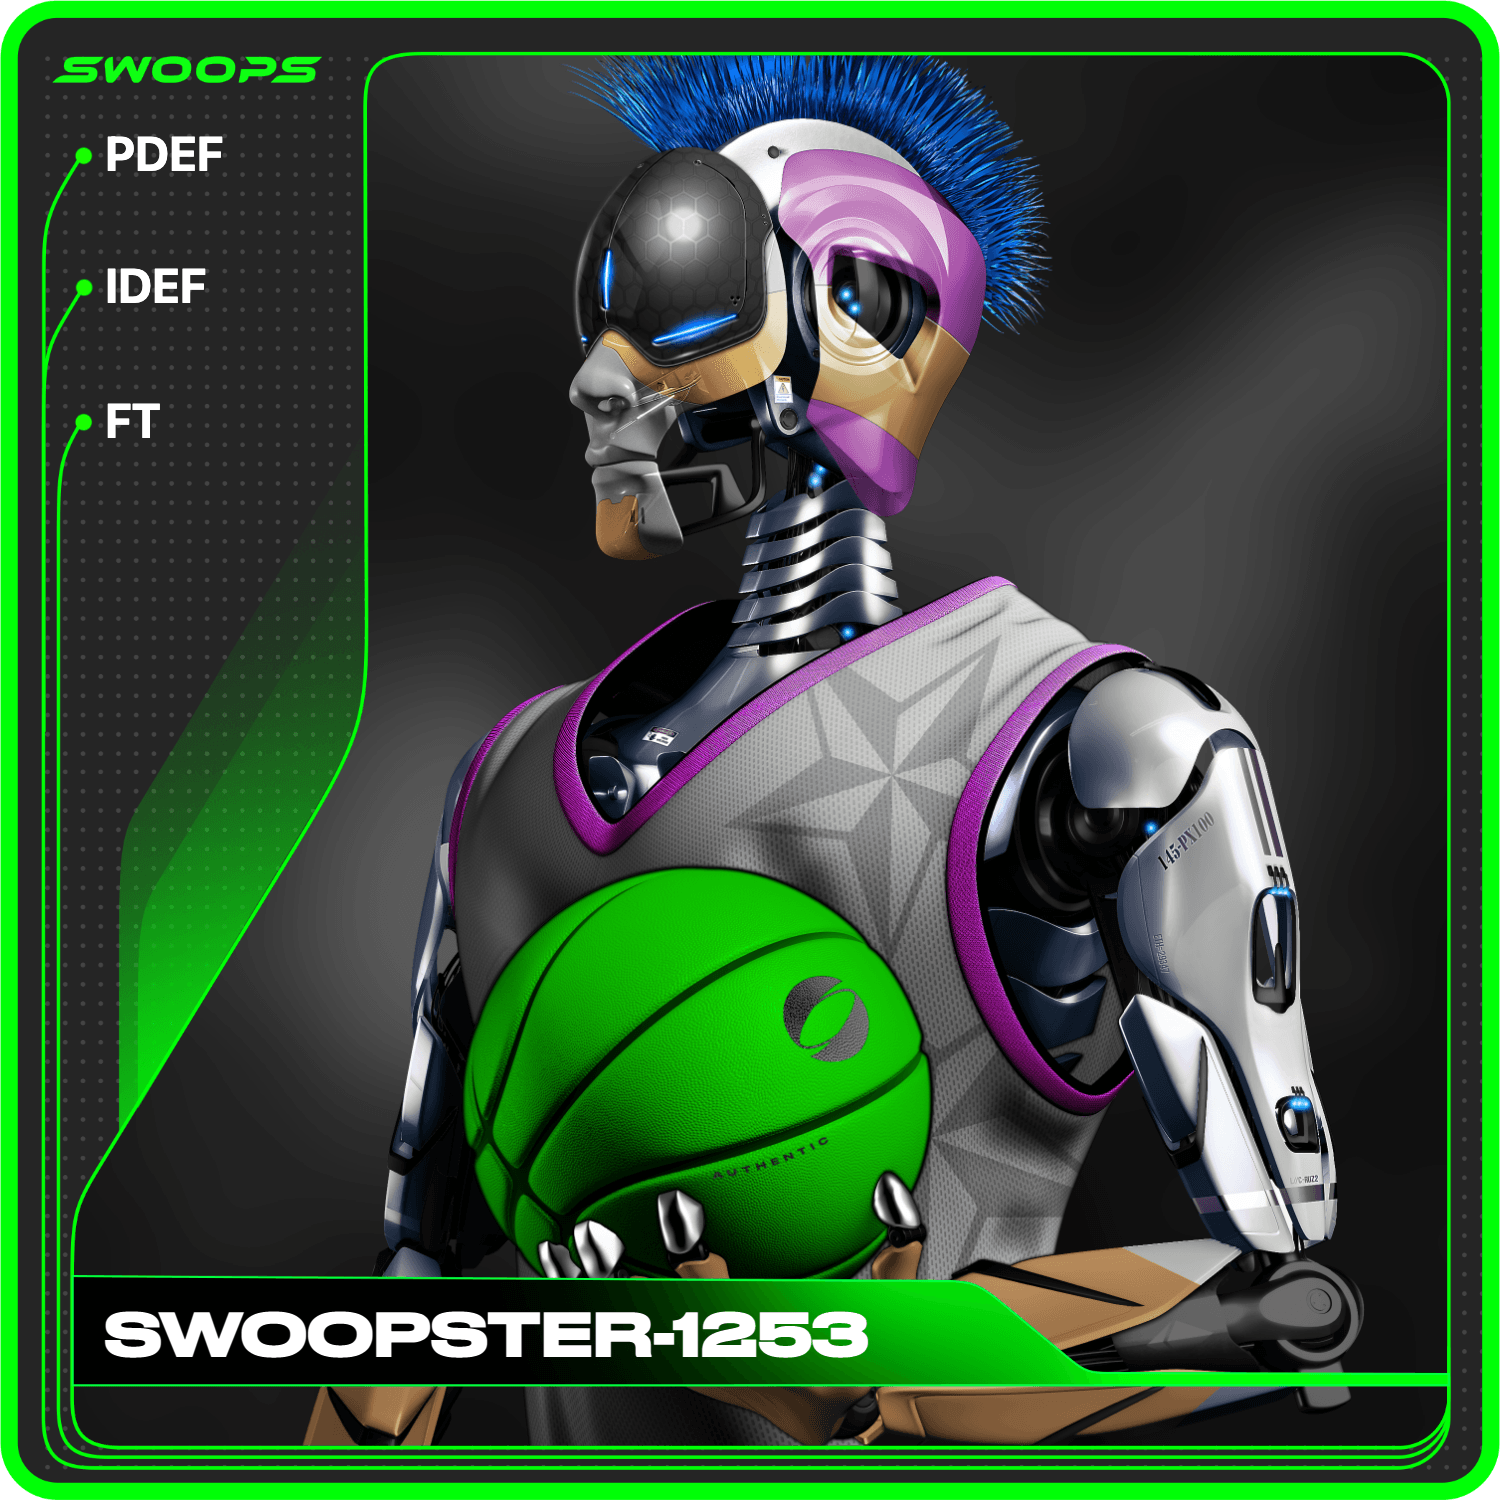 SWOOPSTER-1253